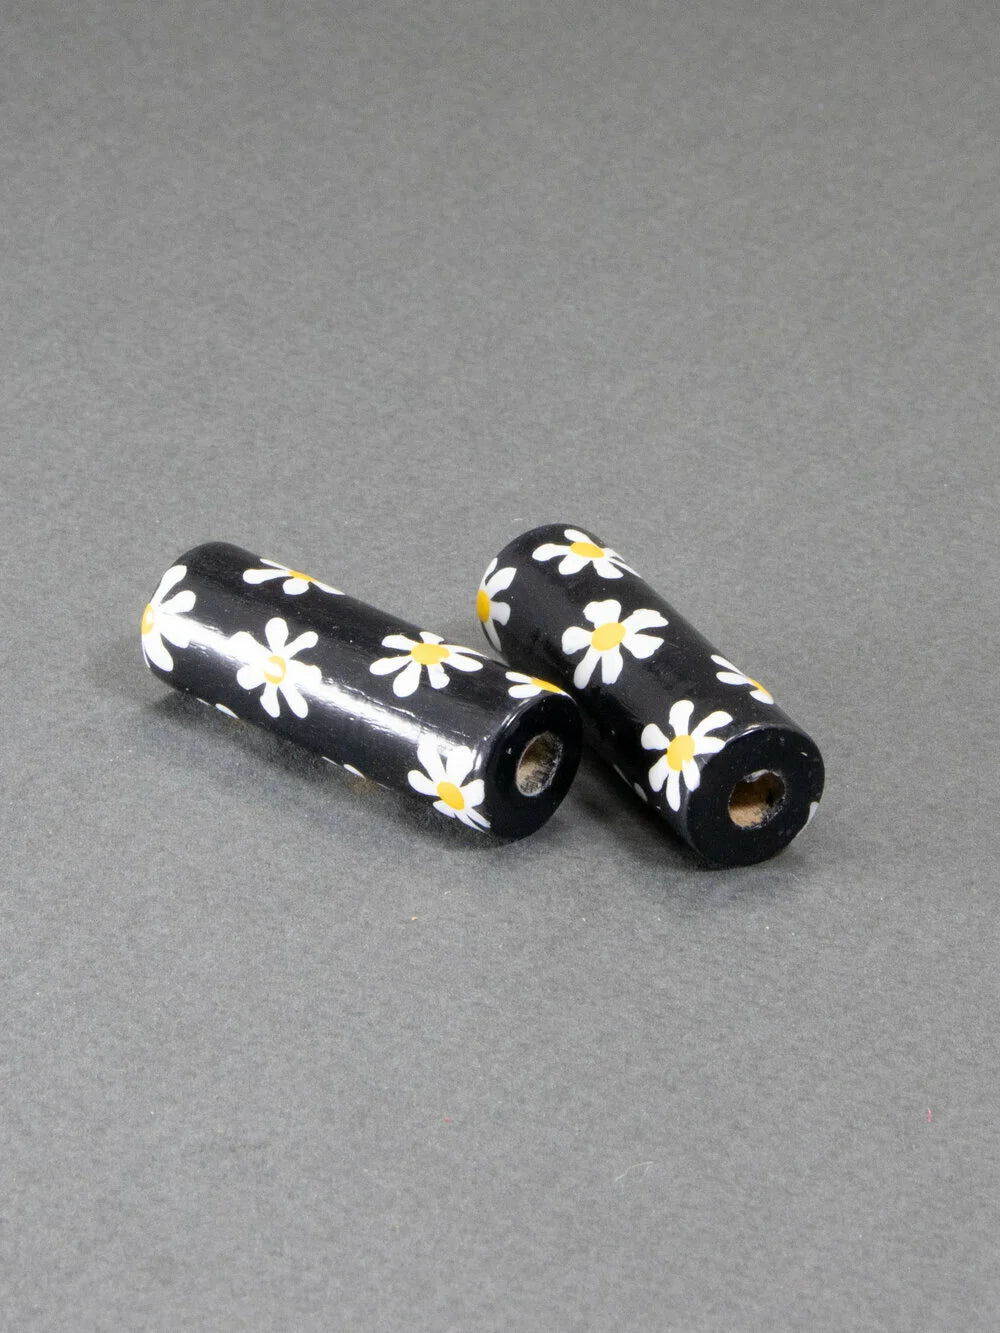 Black Daisy Wooden Bead in Cylinder Shape